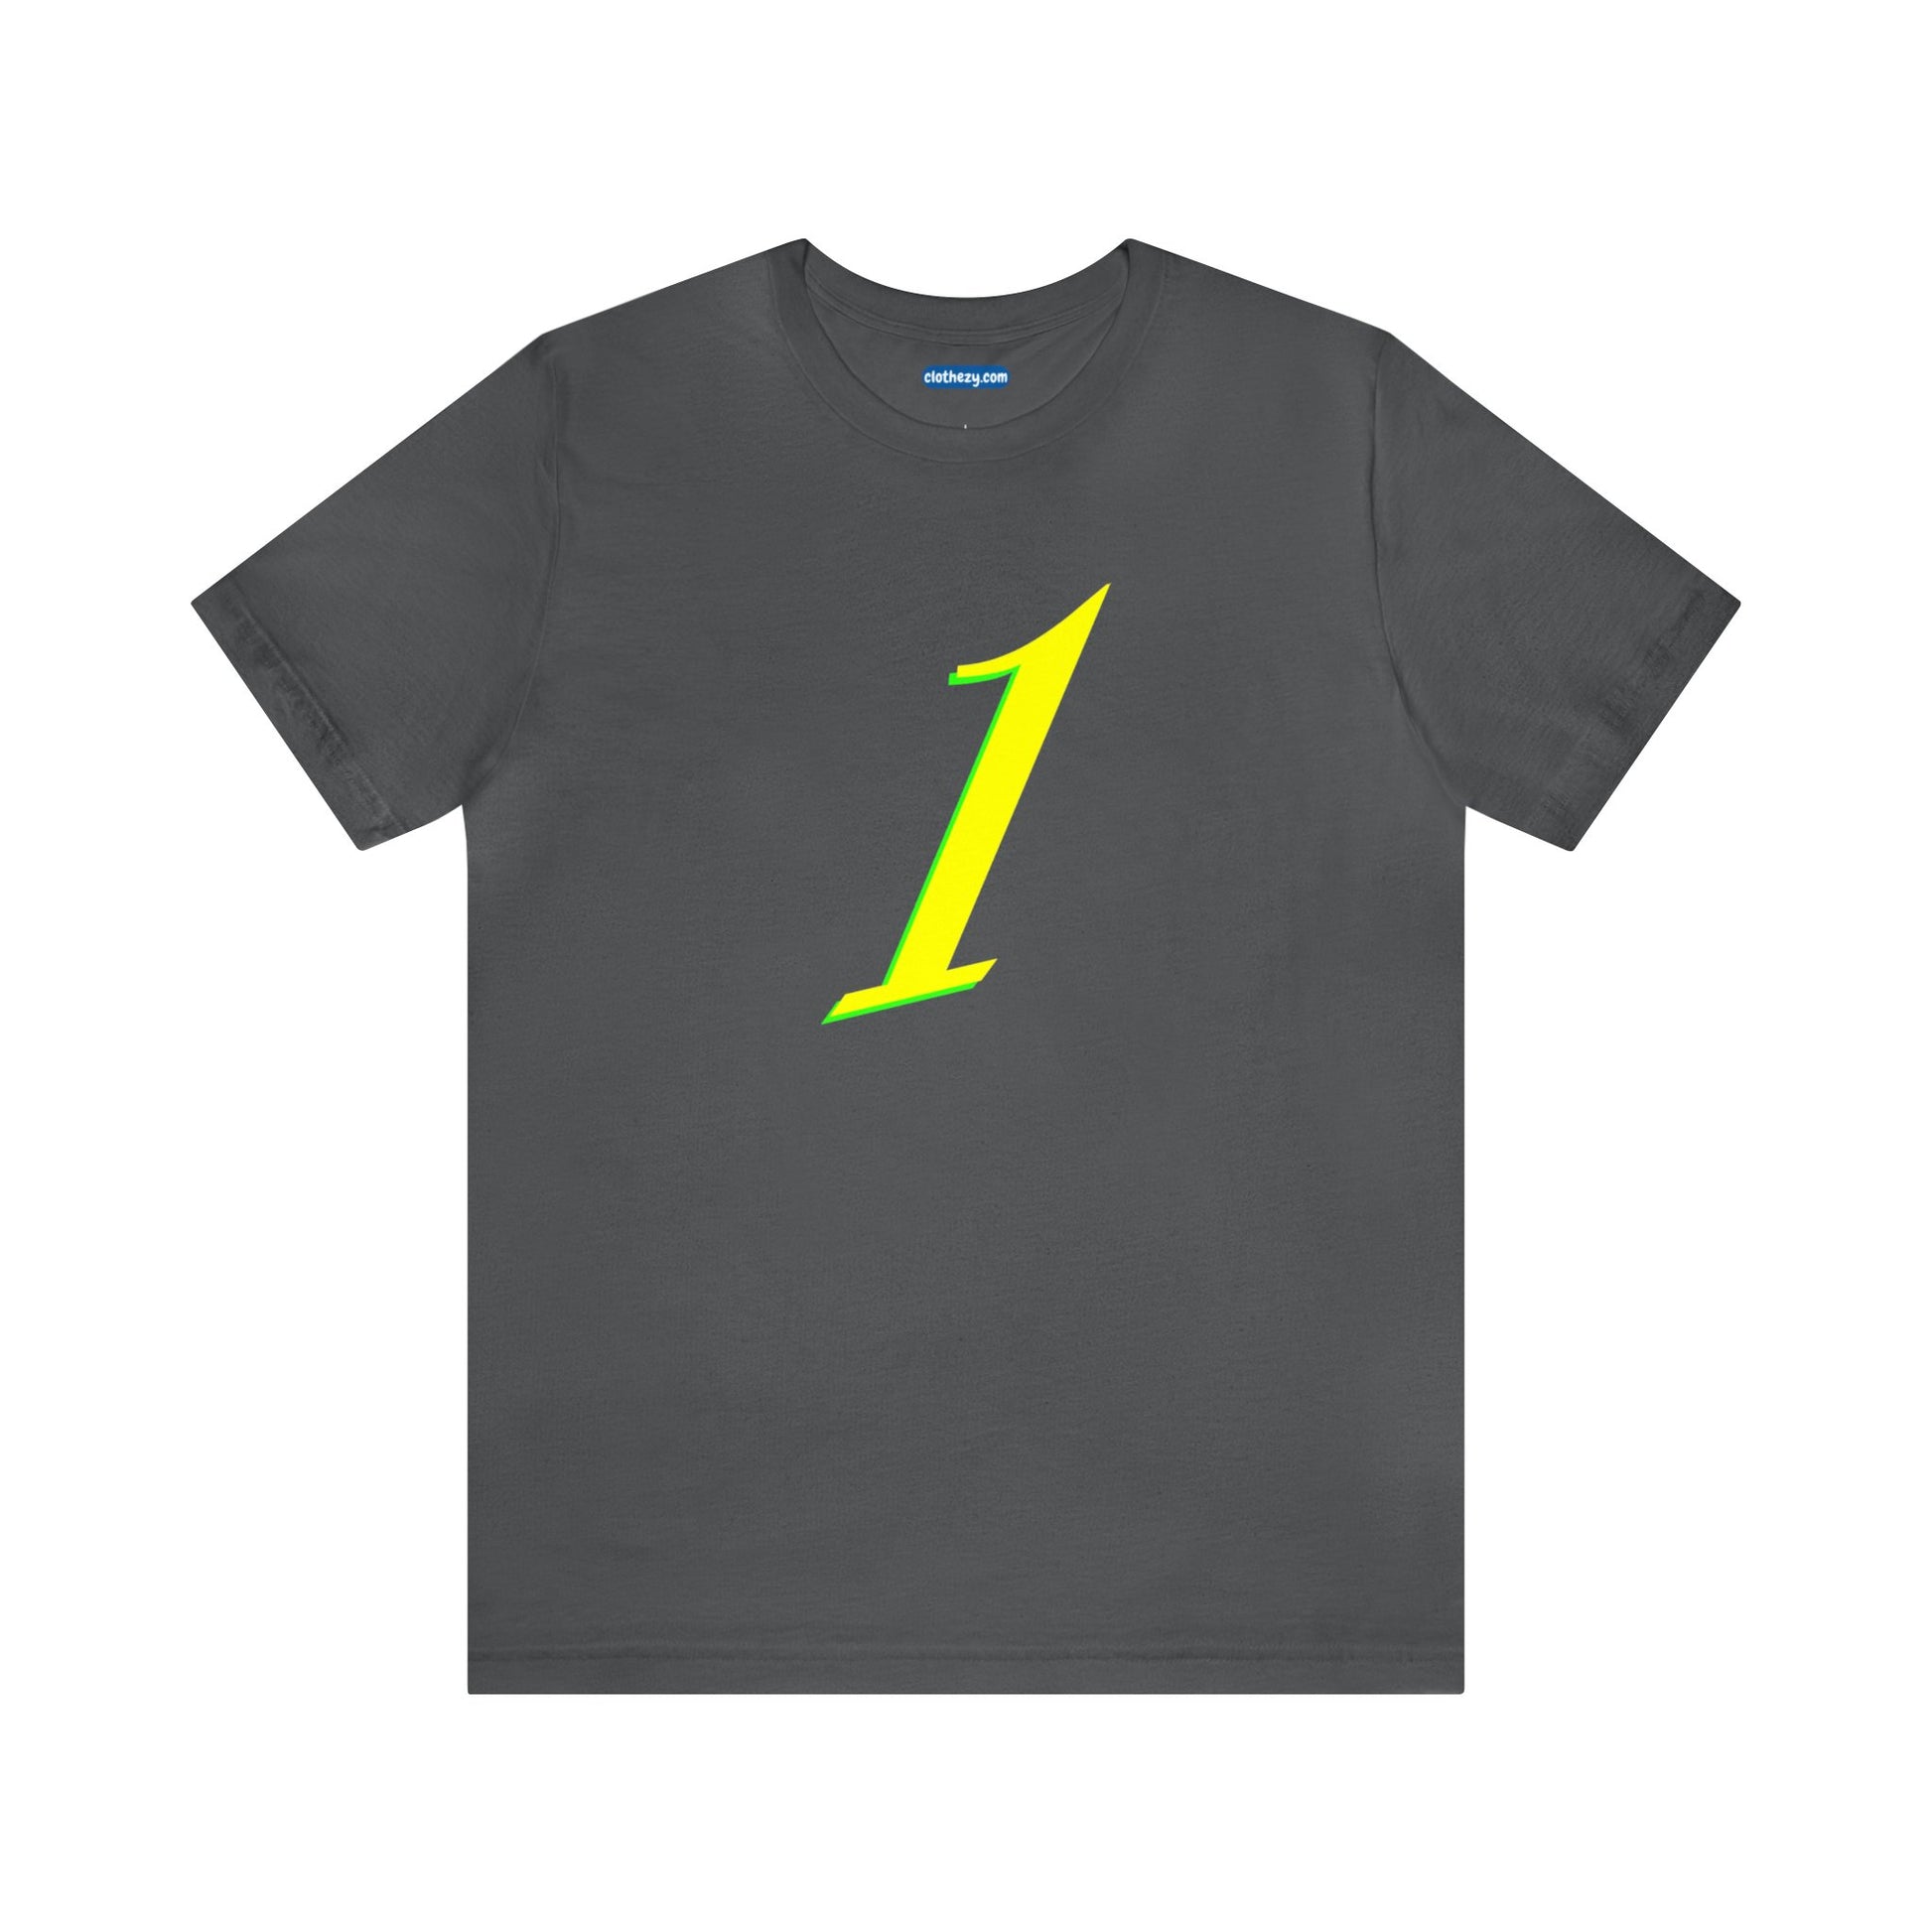 Number 1 Design - Soft Cotton Tee for birthdays and celebrations, Gift for friends and family, Multiple Options by clothezy.com in Black Size Small - Buy Now